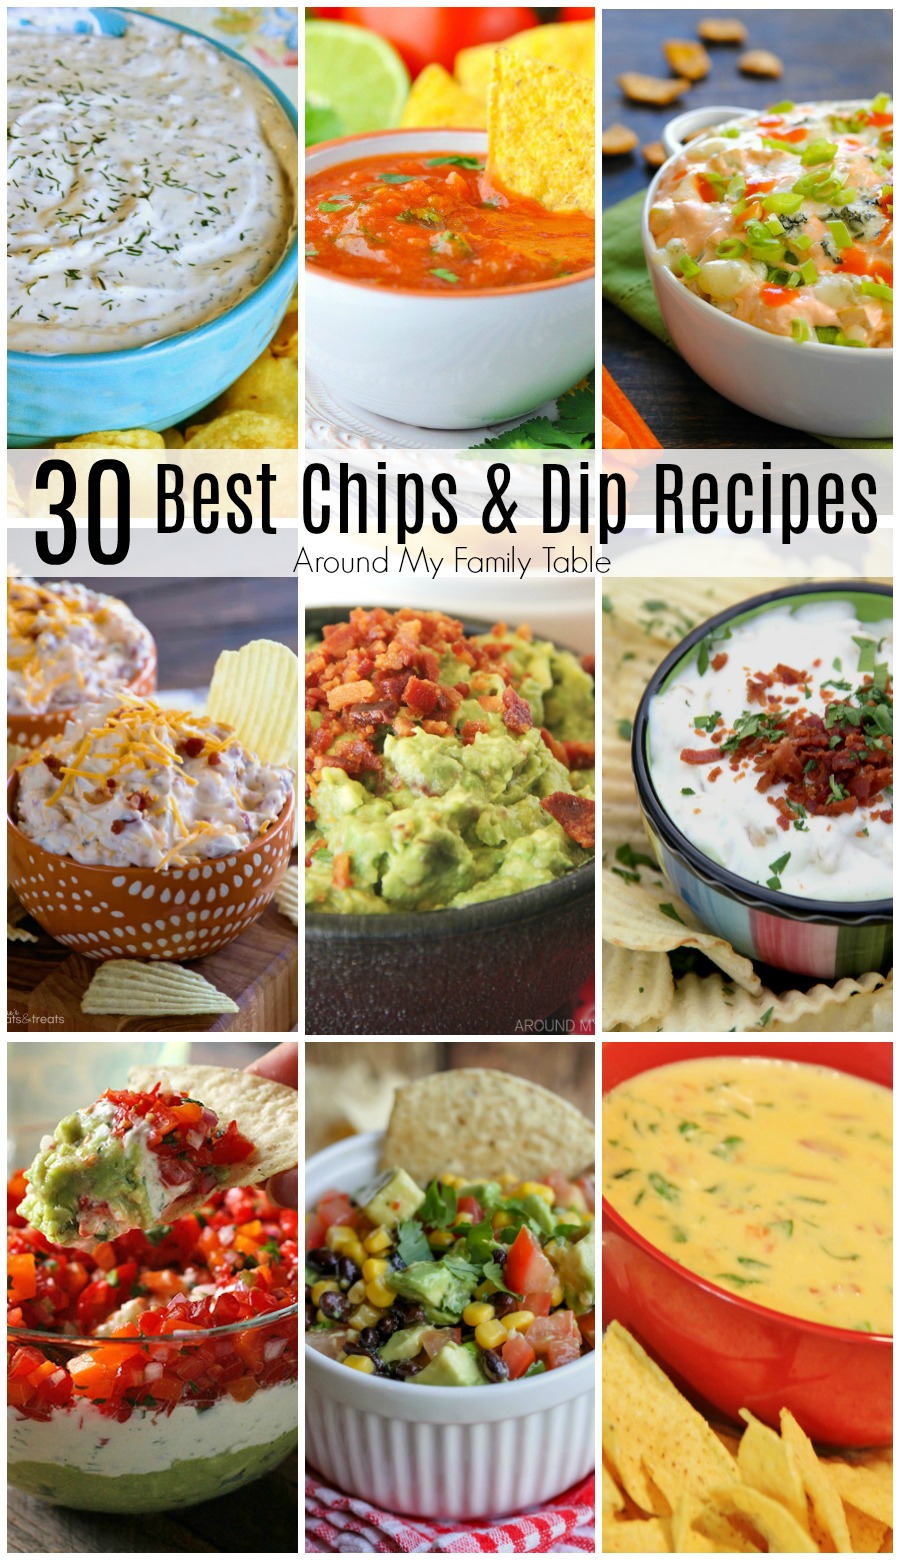 Who doesn’t love chips and dip?  This roundup has the 30 Best Chip & Dip Recipes that are super easy to whip up!